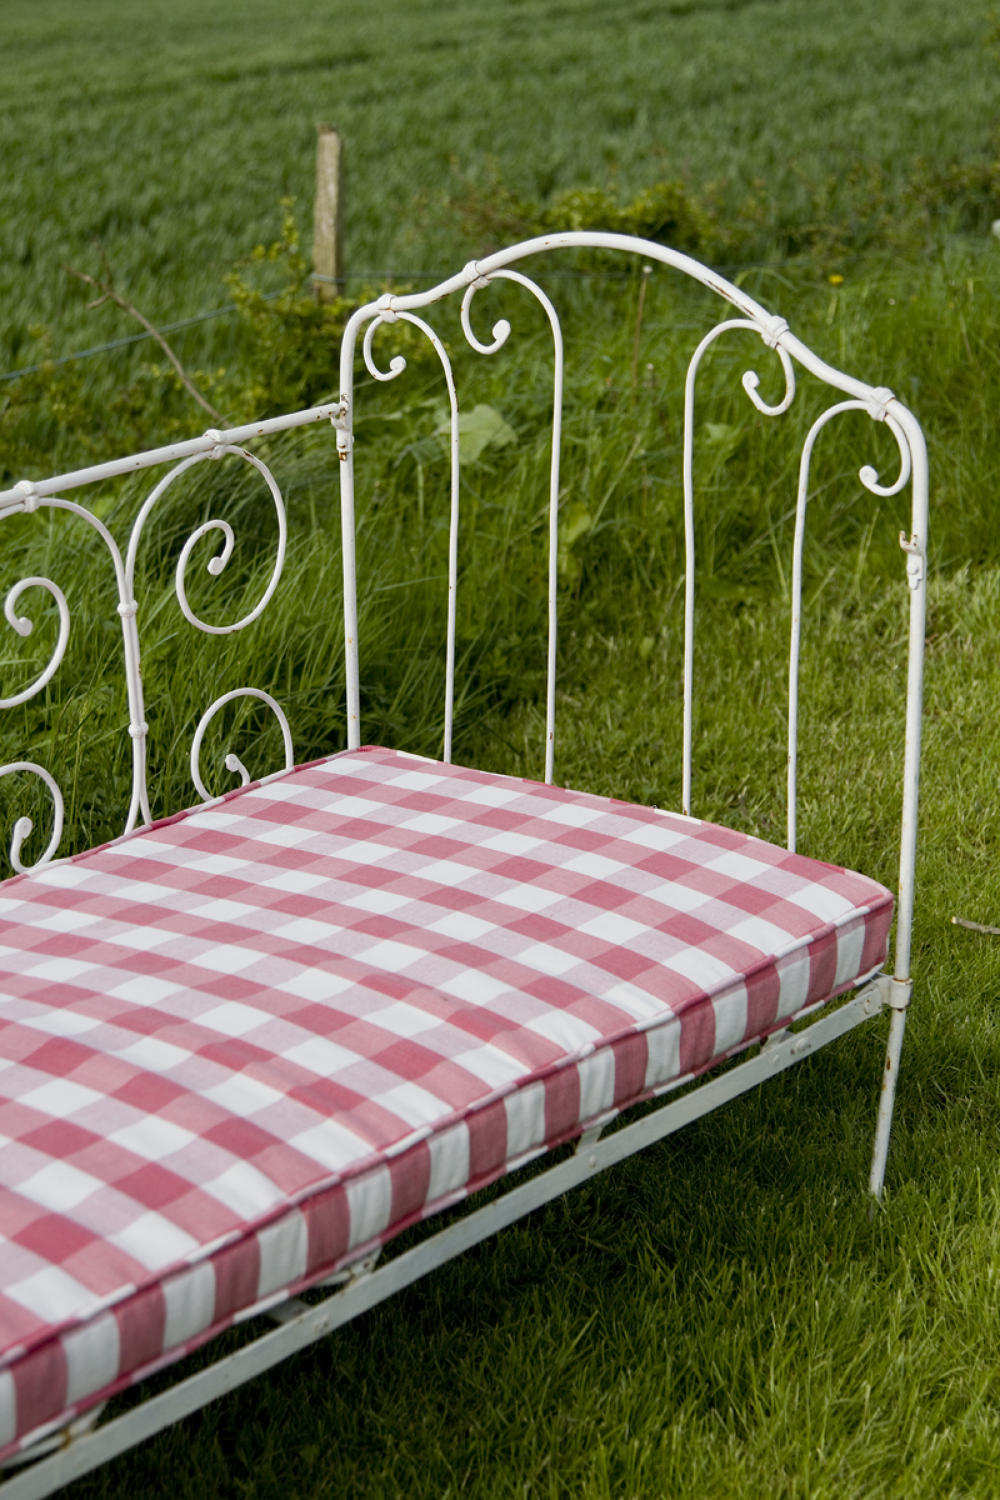 French Antique Child's Day Bed or Cot